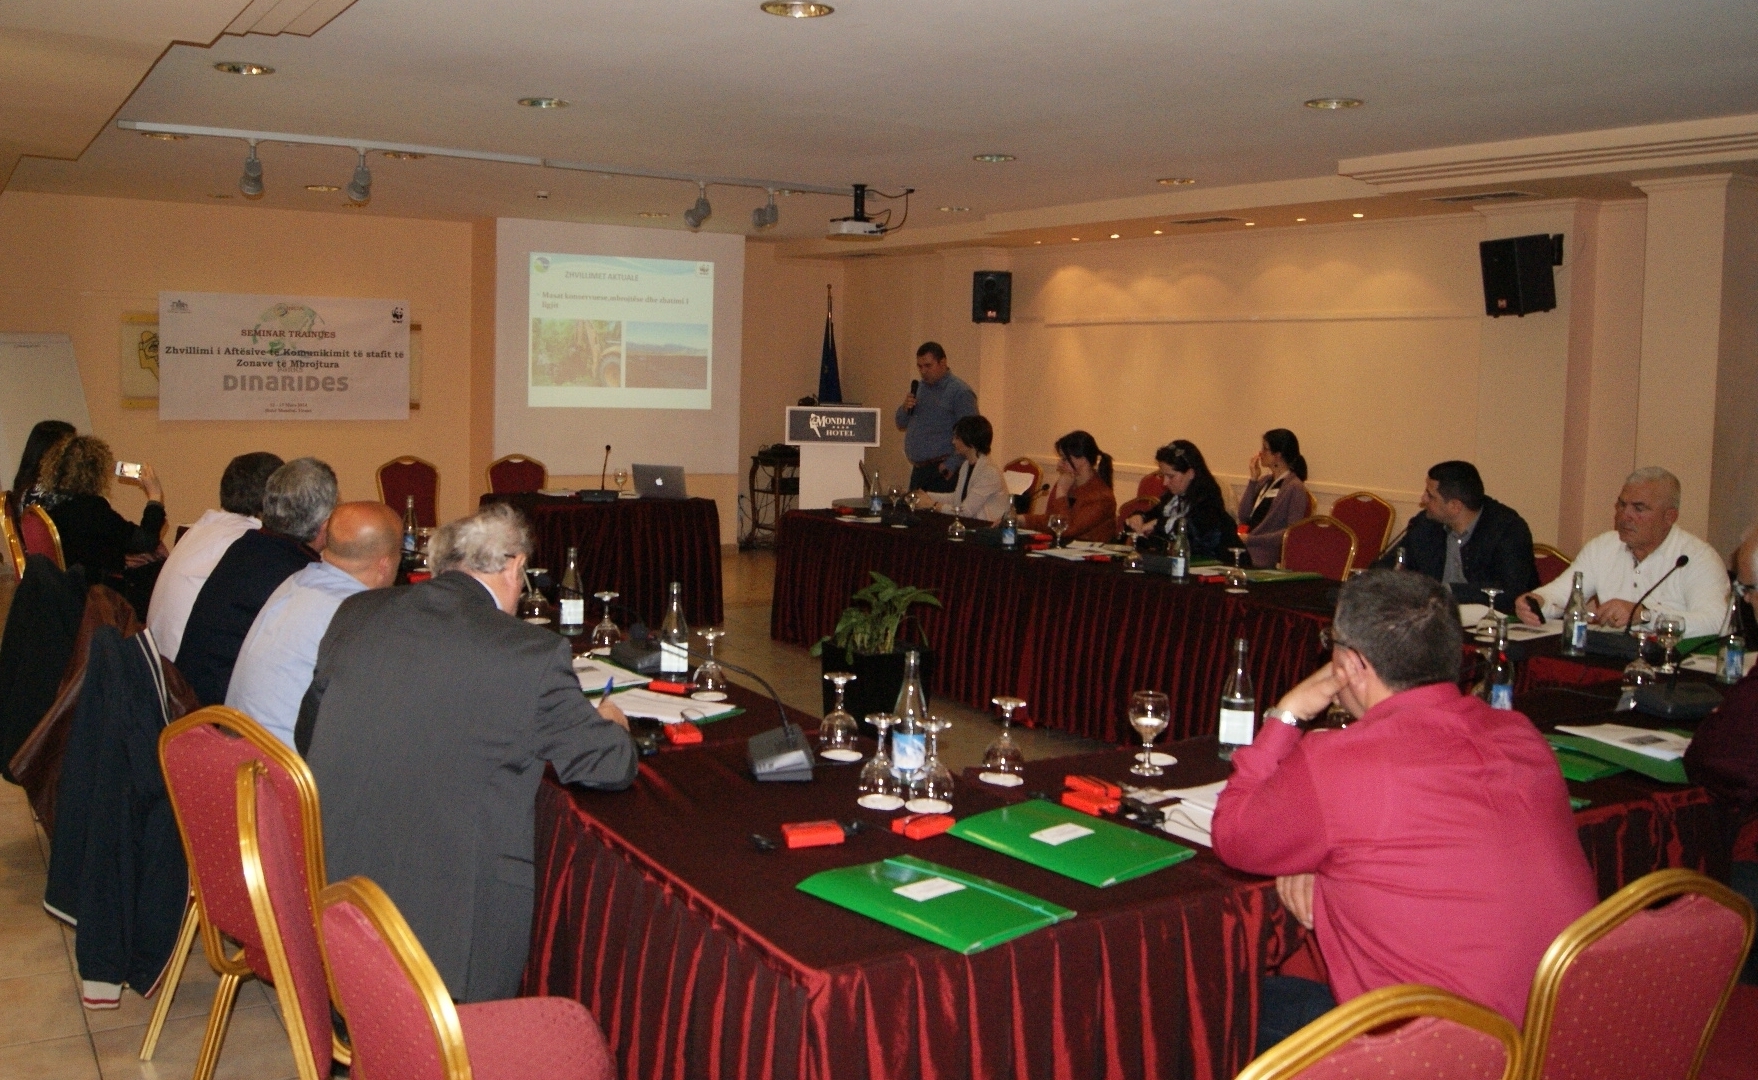 Developing communication skills for the staff of the Protected Areas